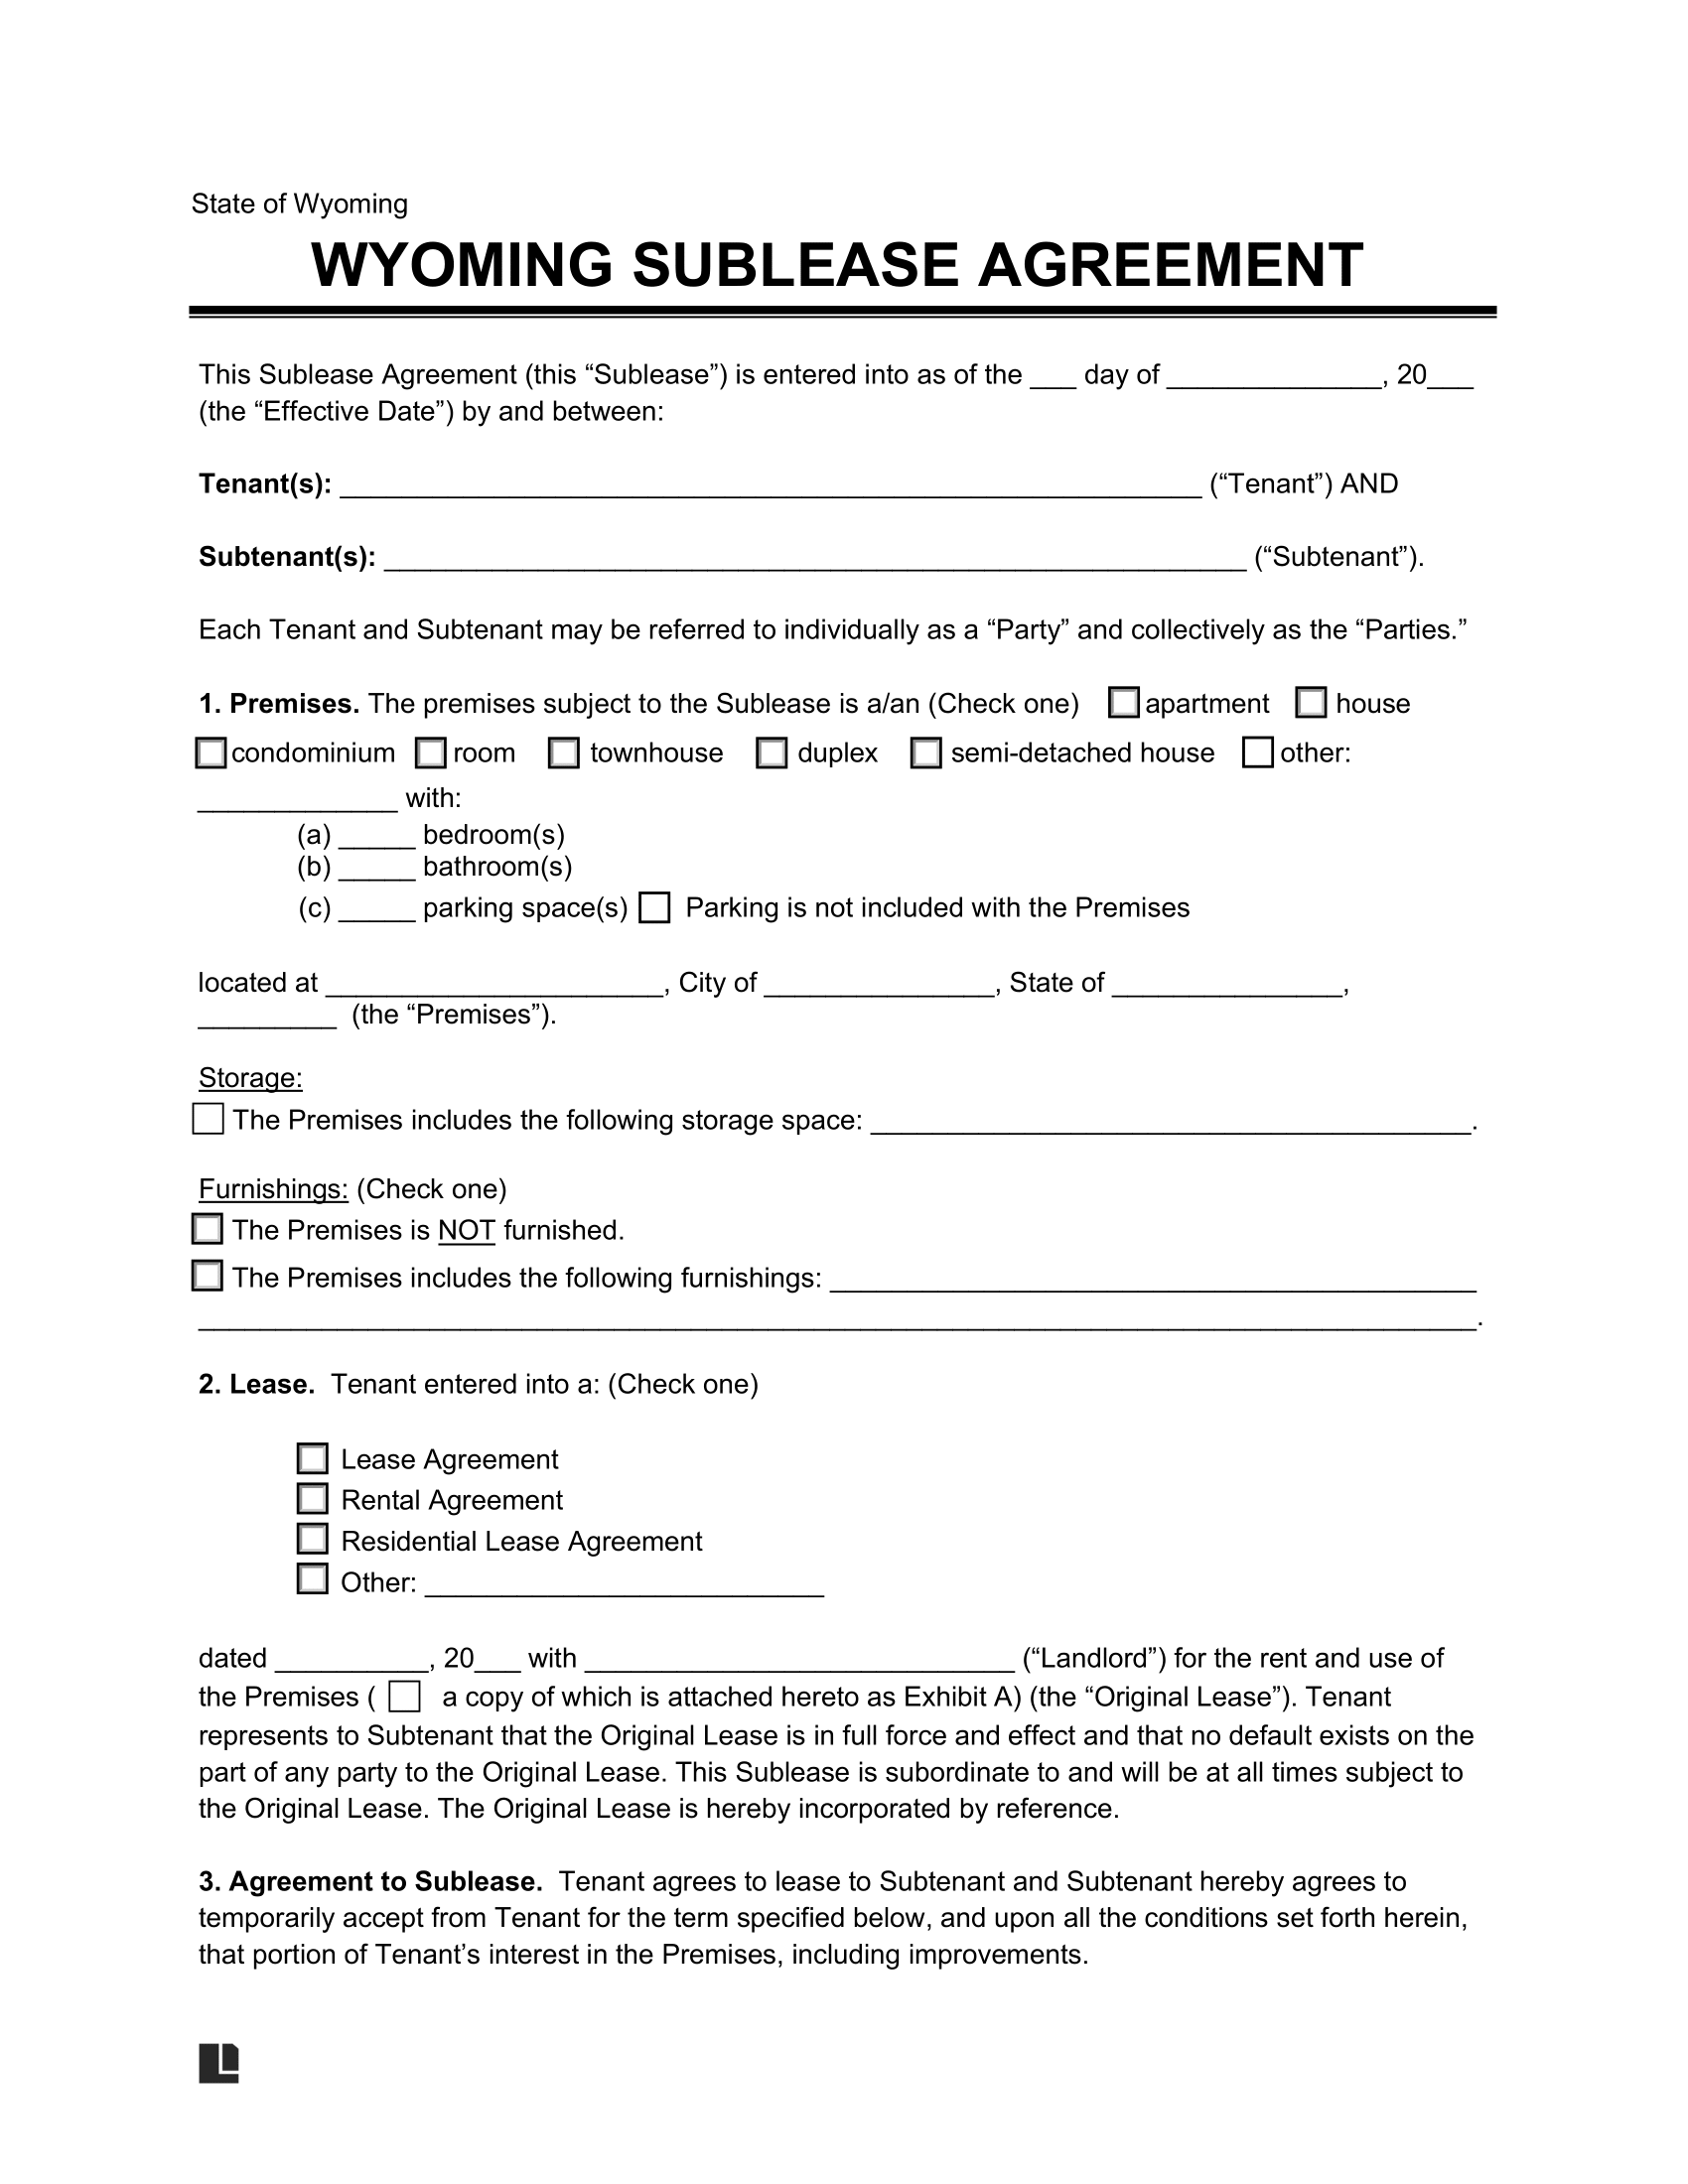 Wyoming Sublease Agreement Template